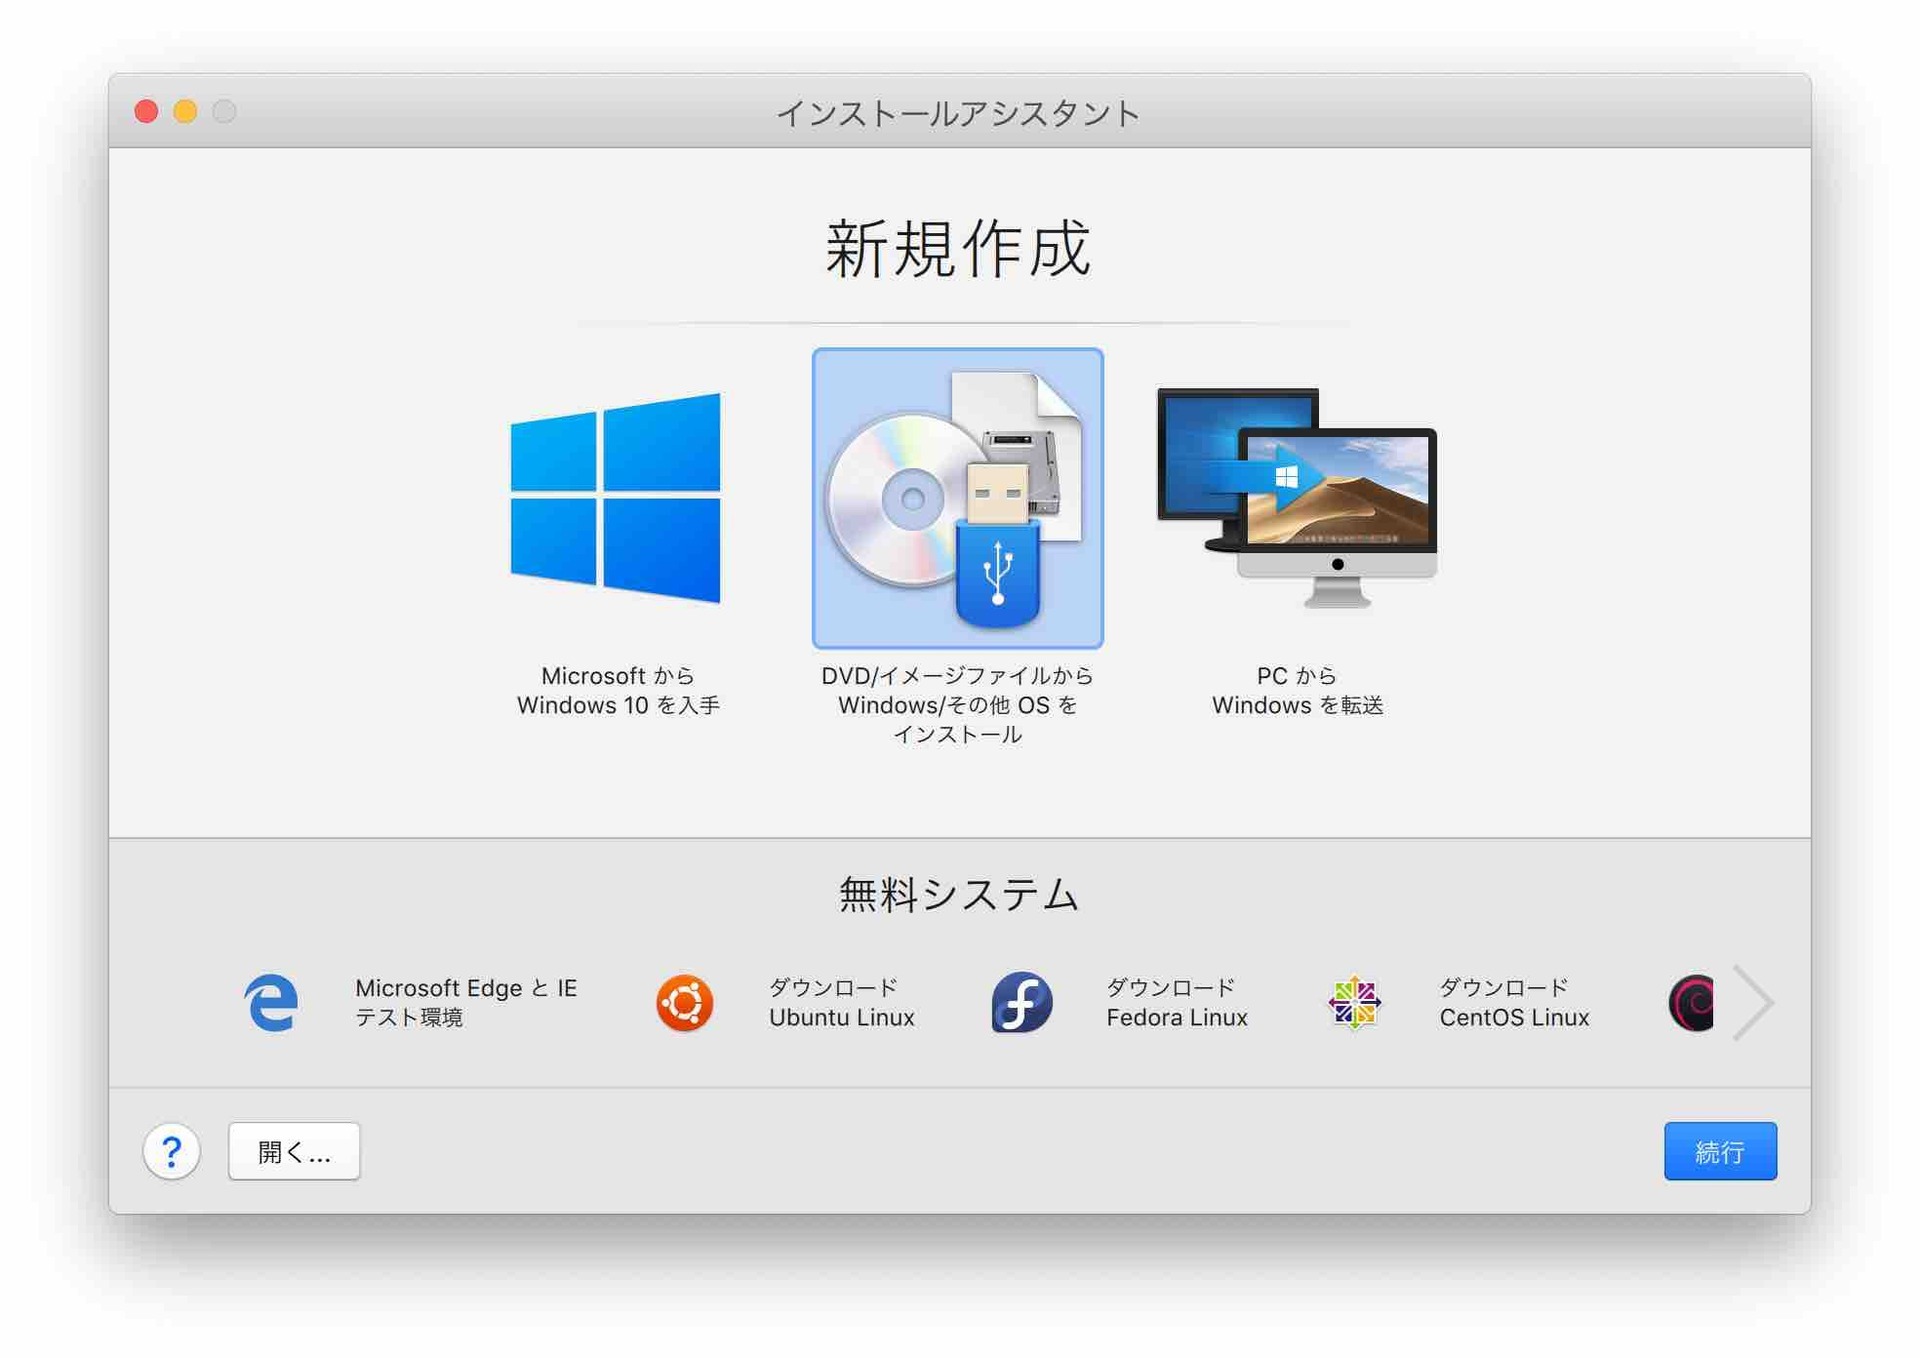 late2012-parallels17-windows11-install-1.jpg